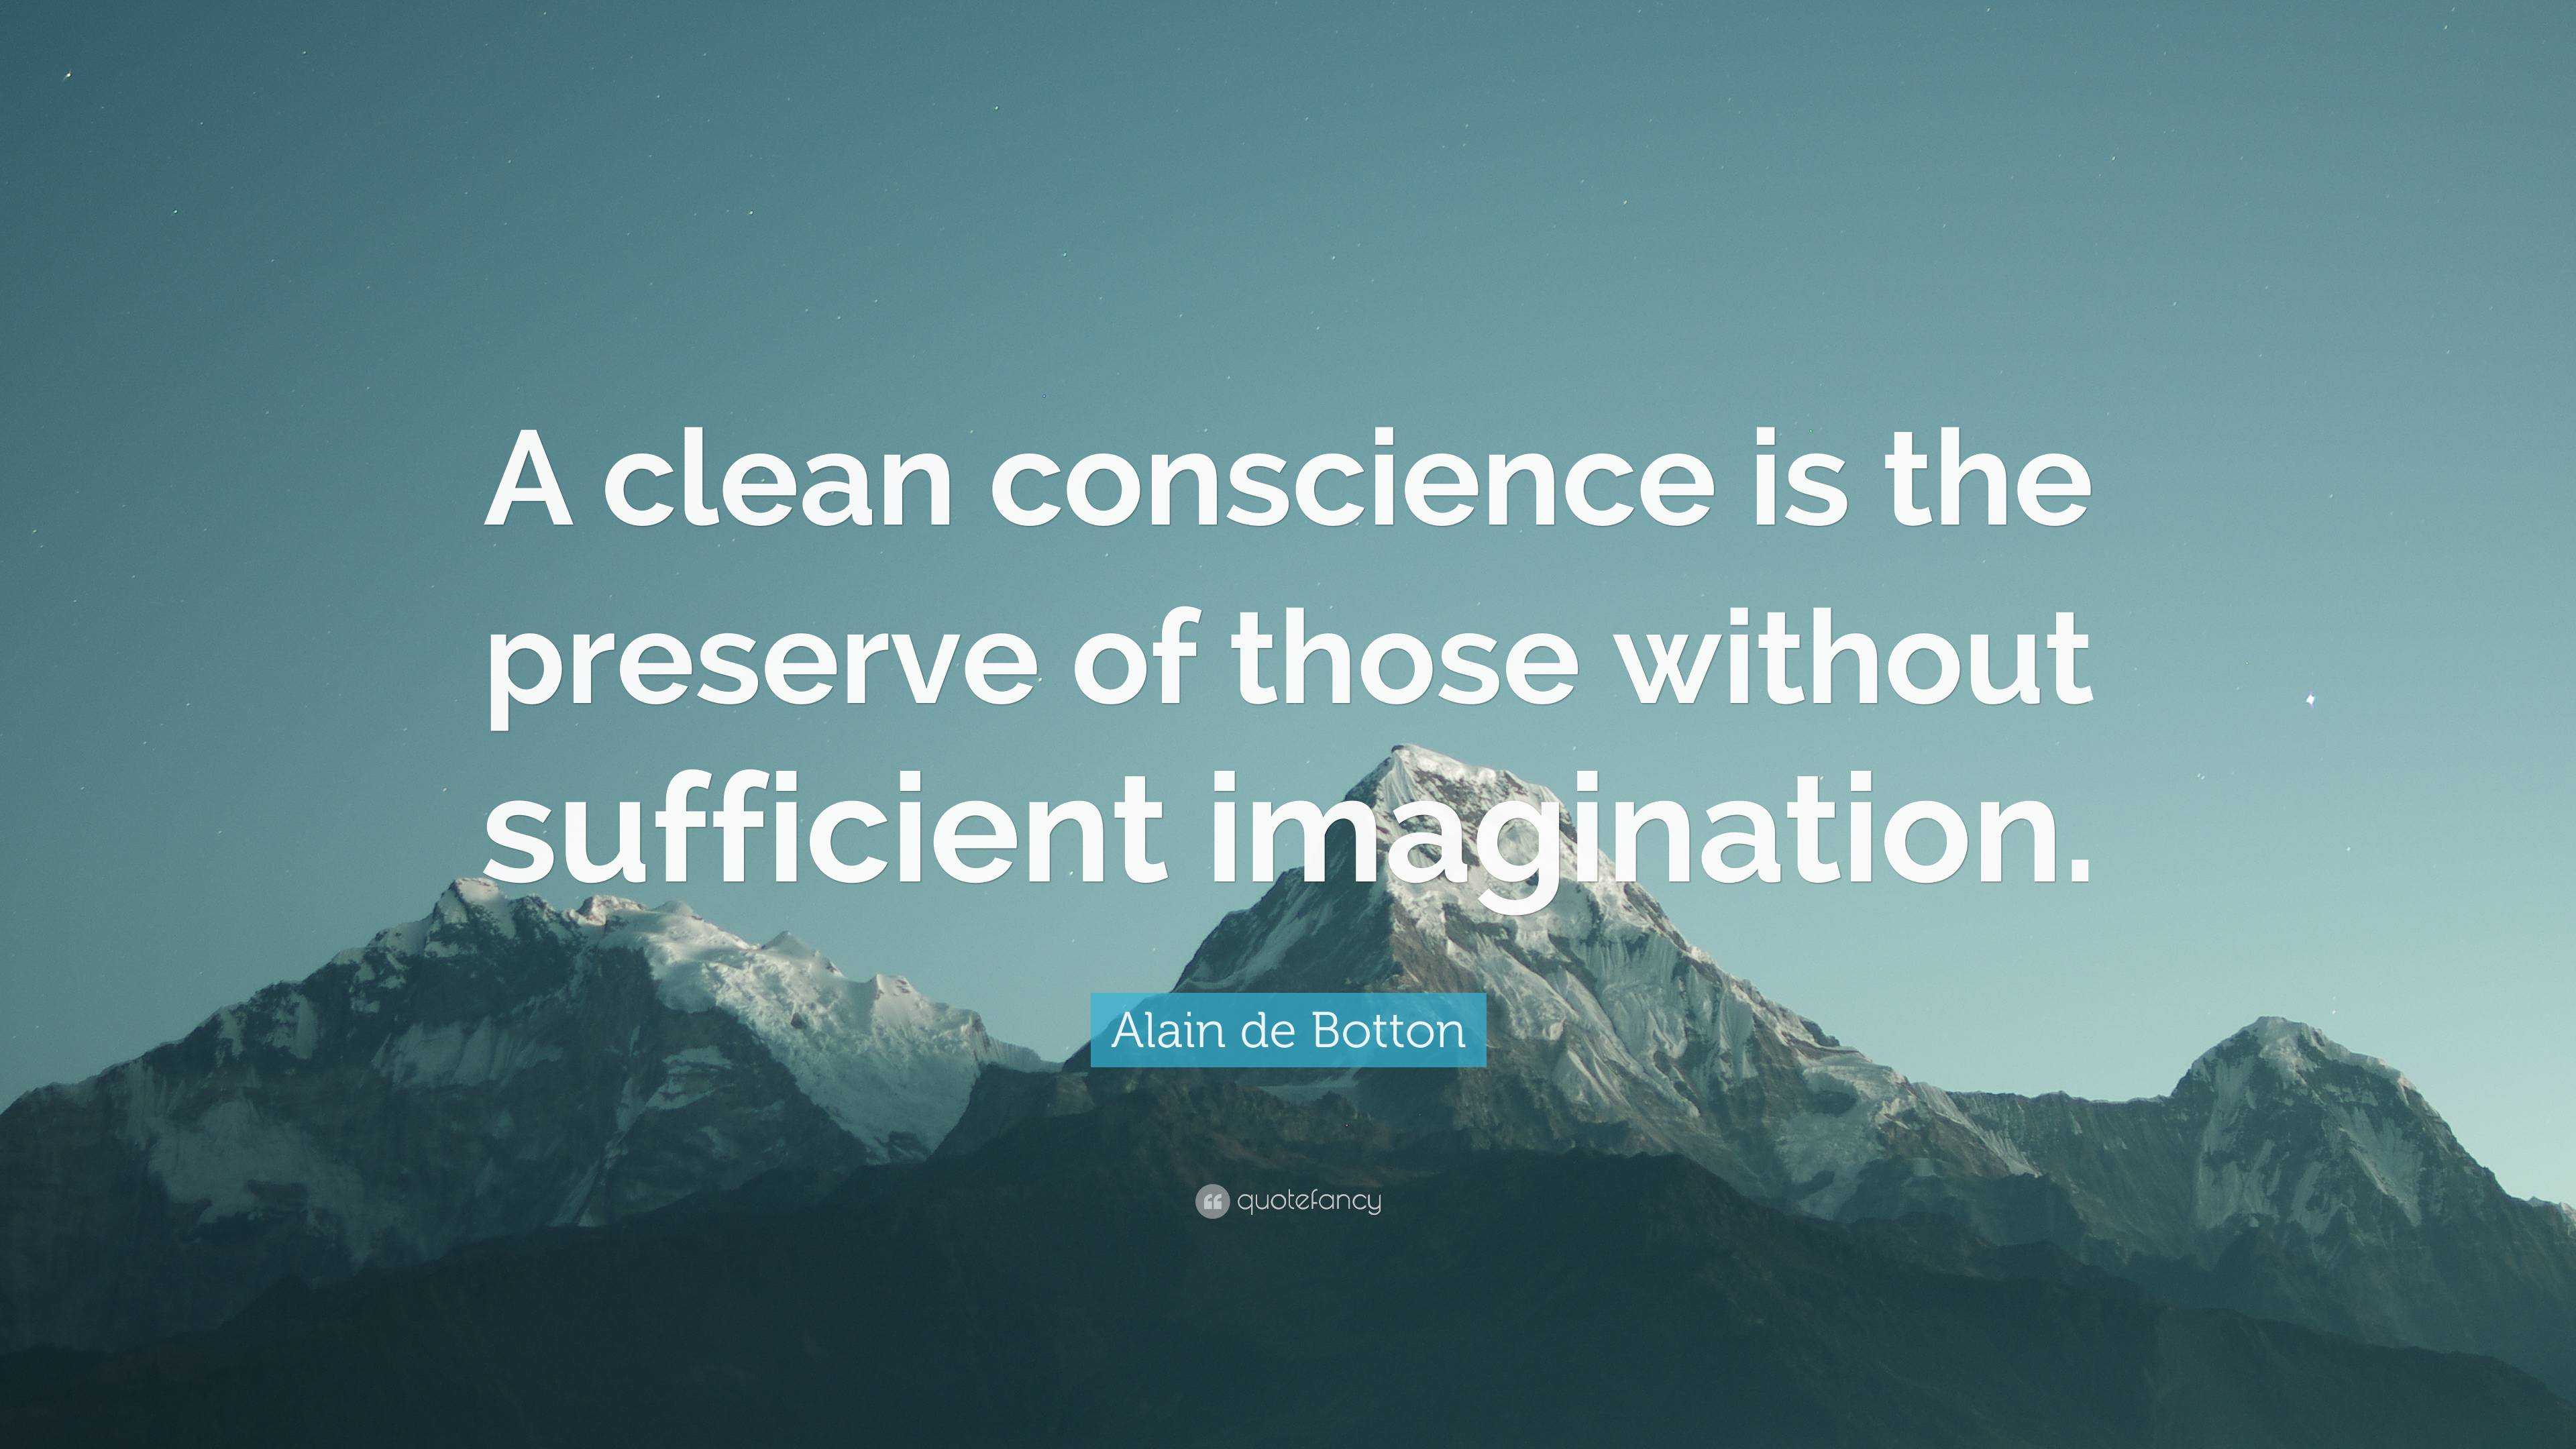 Alain de Botton Quote: “A clean conscience is the preserve of those ...